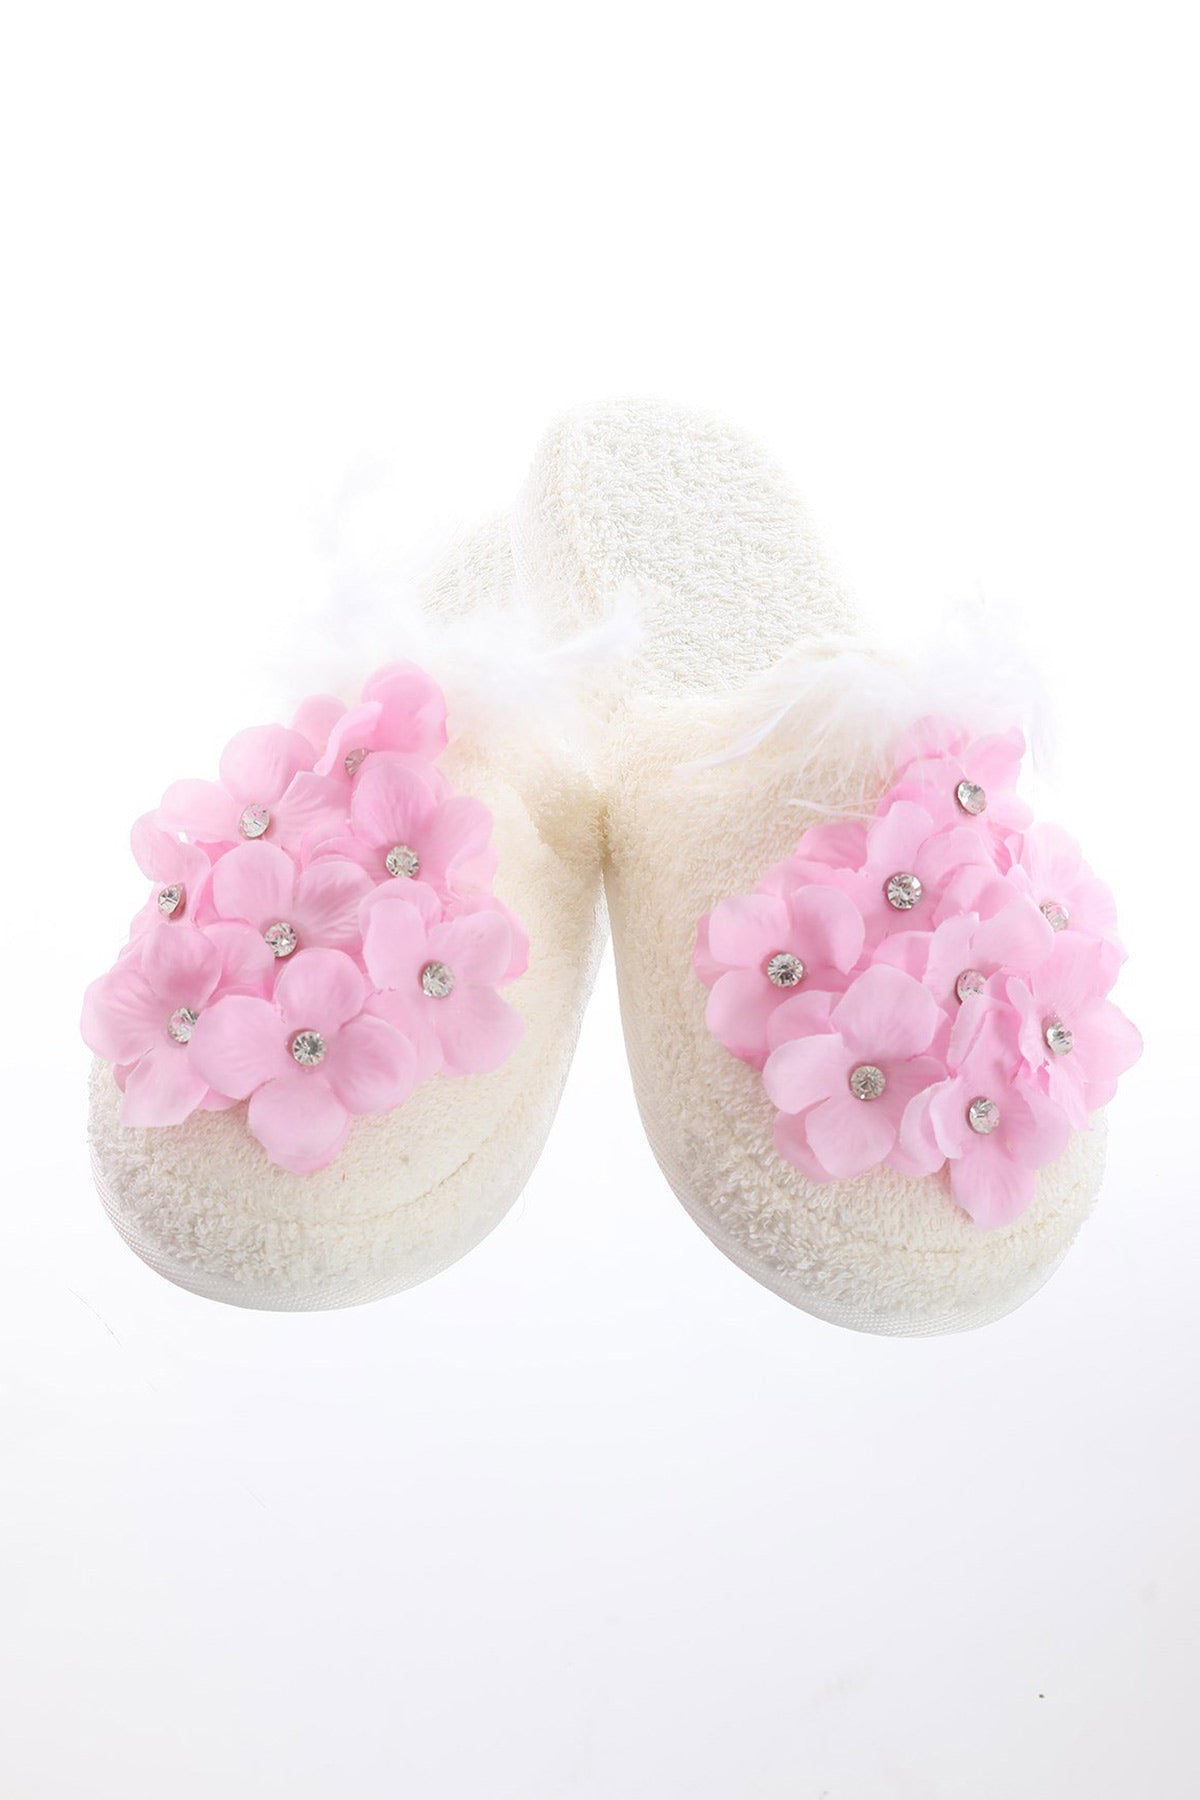 Shopymommy 75003 Violet Flowered Maternity Slippers Pink